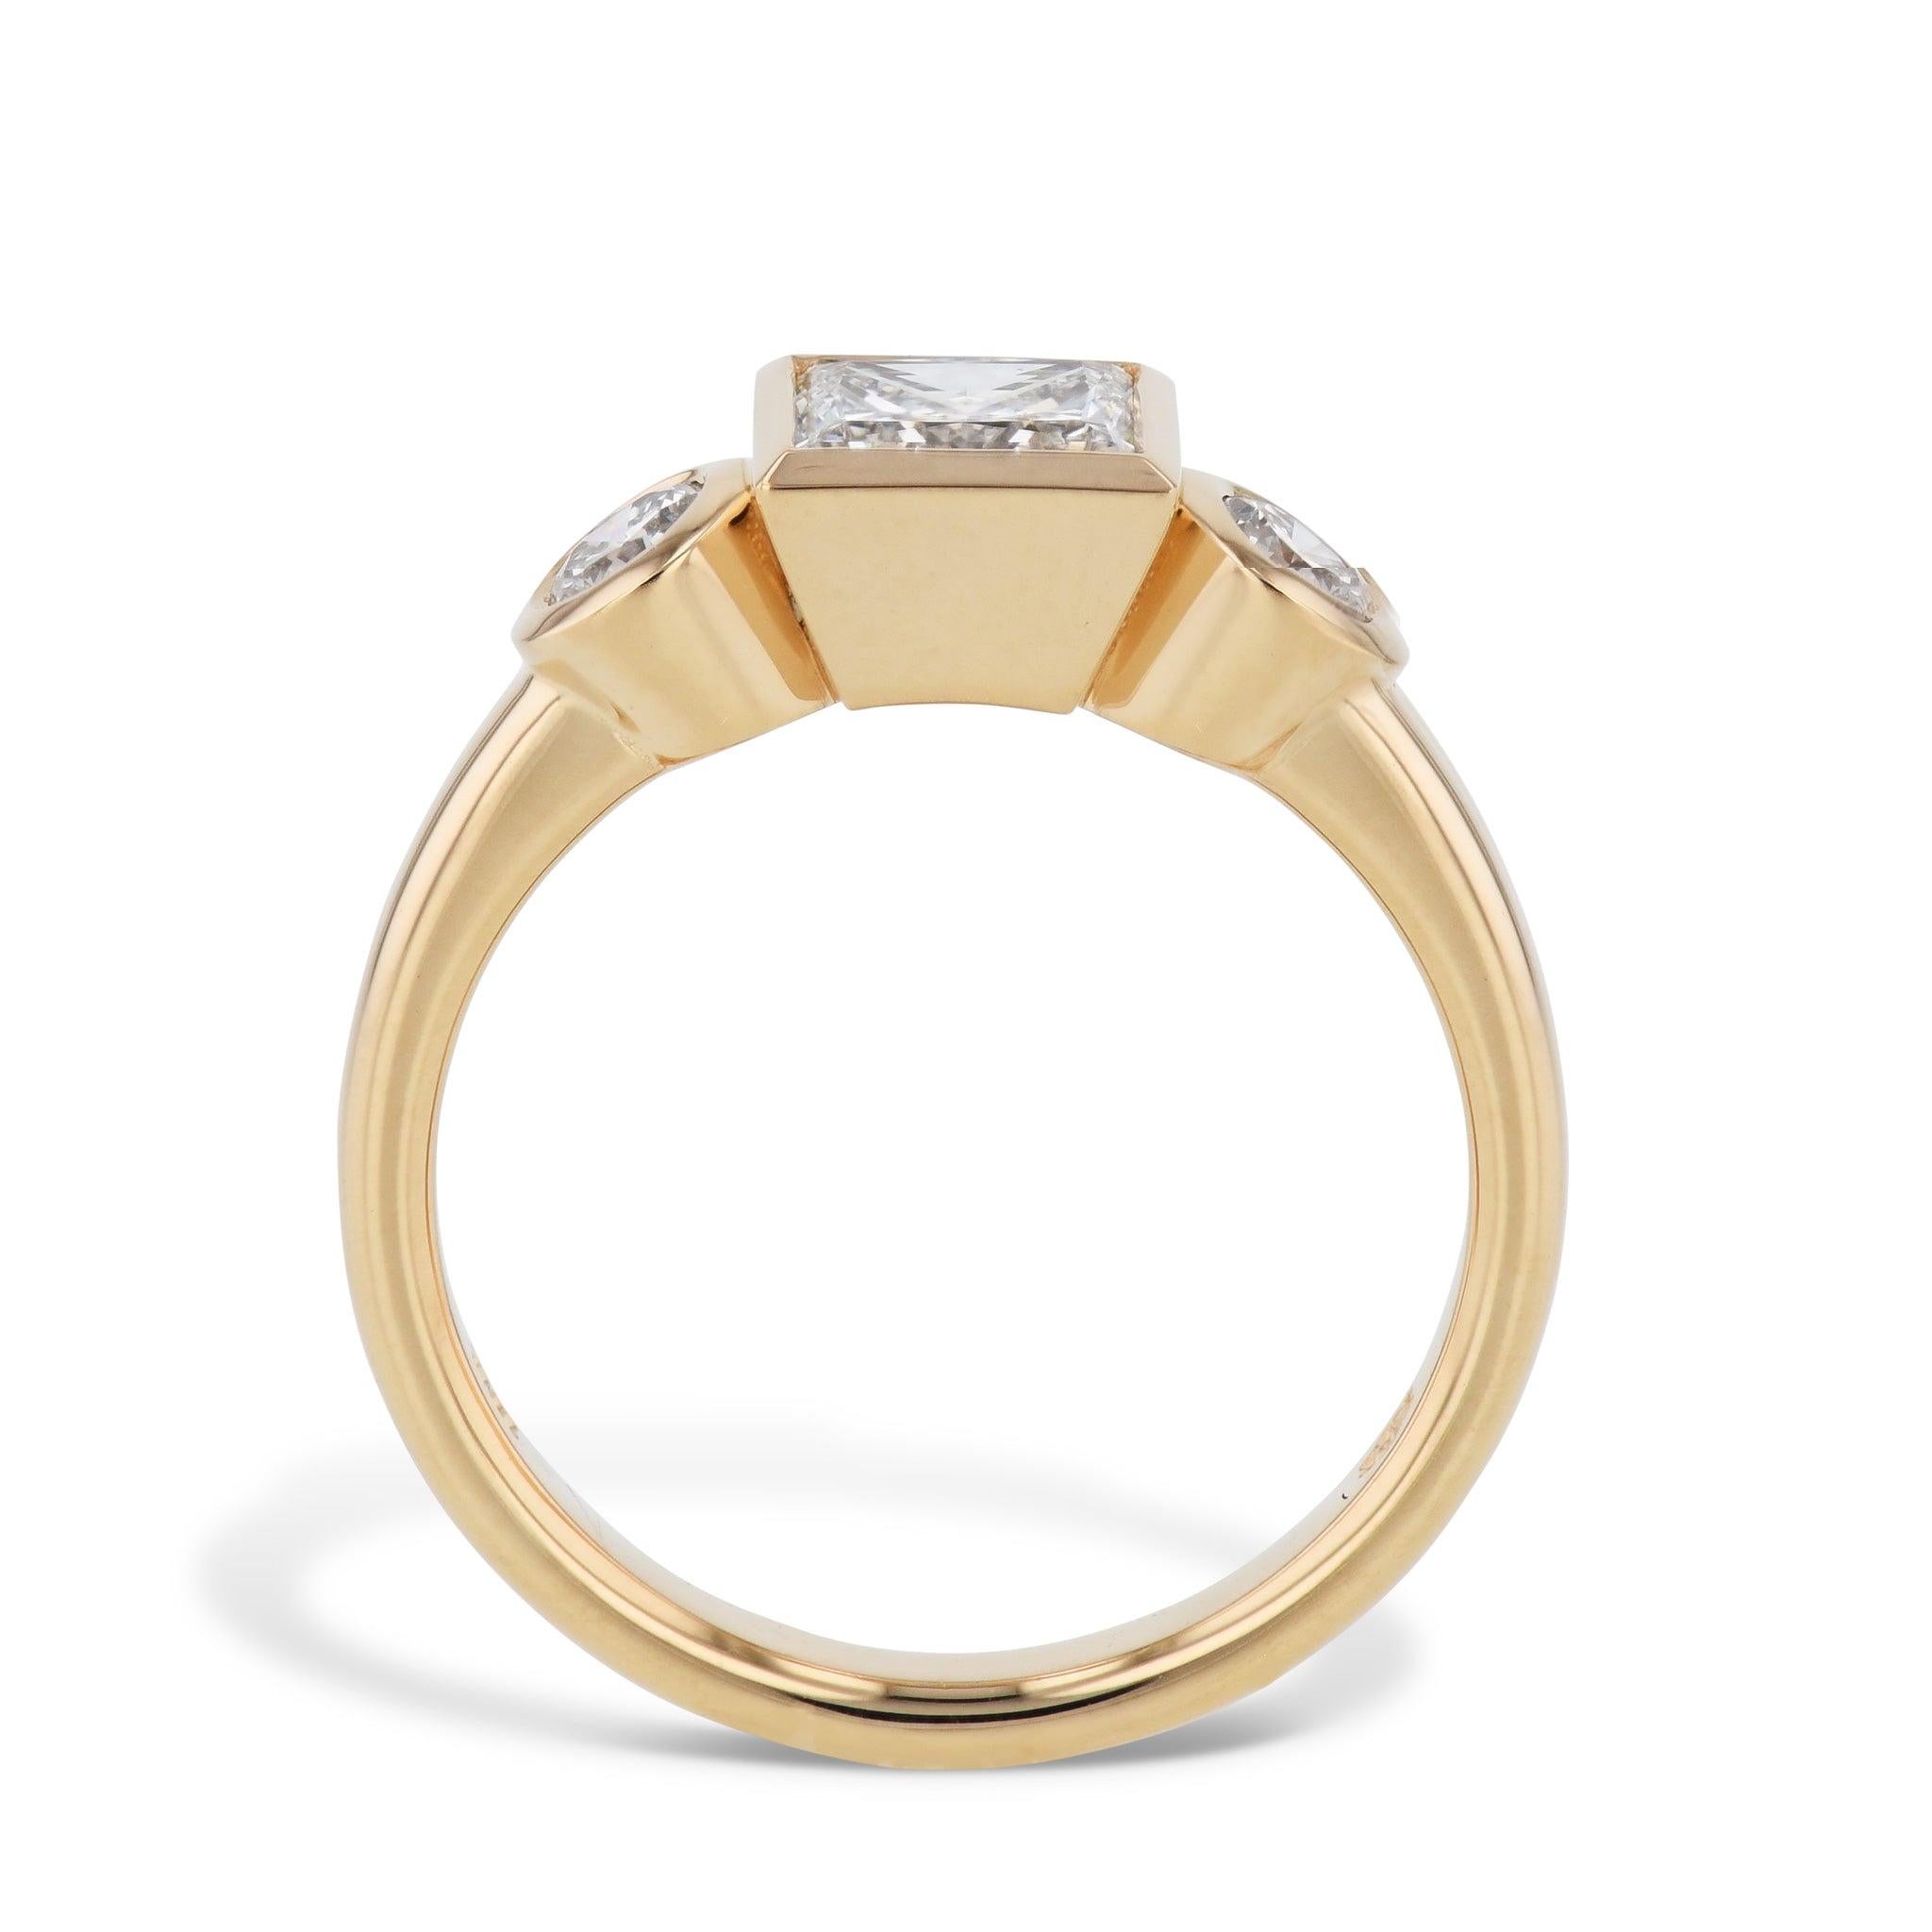 Our Square & Round Bezel Set Diamond Engagement Ring exudes glamour and personality. With a magnificent square center stone, two round side diamonds, and 18kt yellow gold. This glamorous ring will be treasured for generations. Handmade with